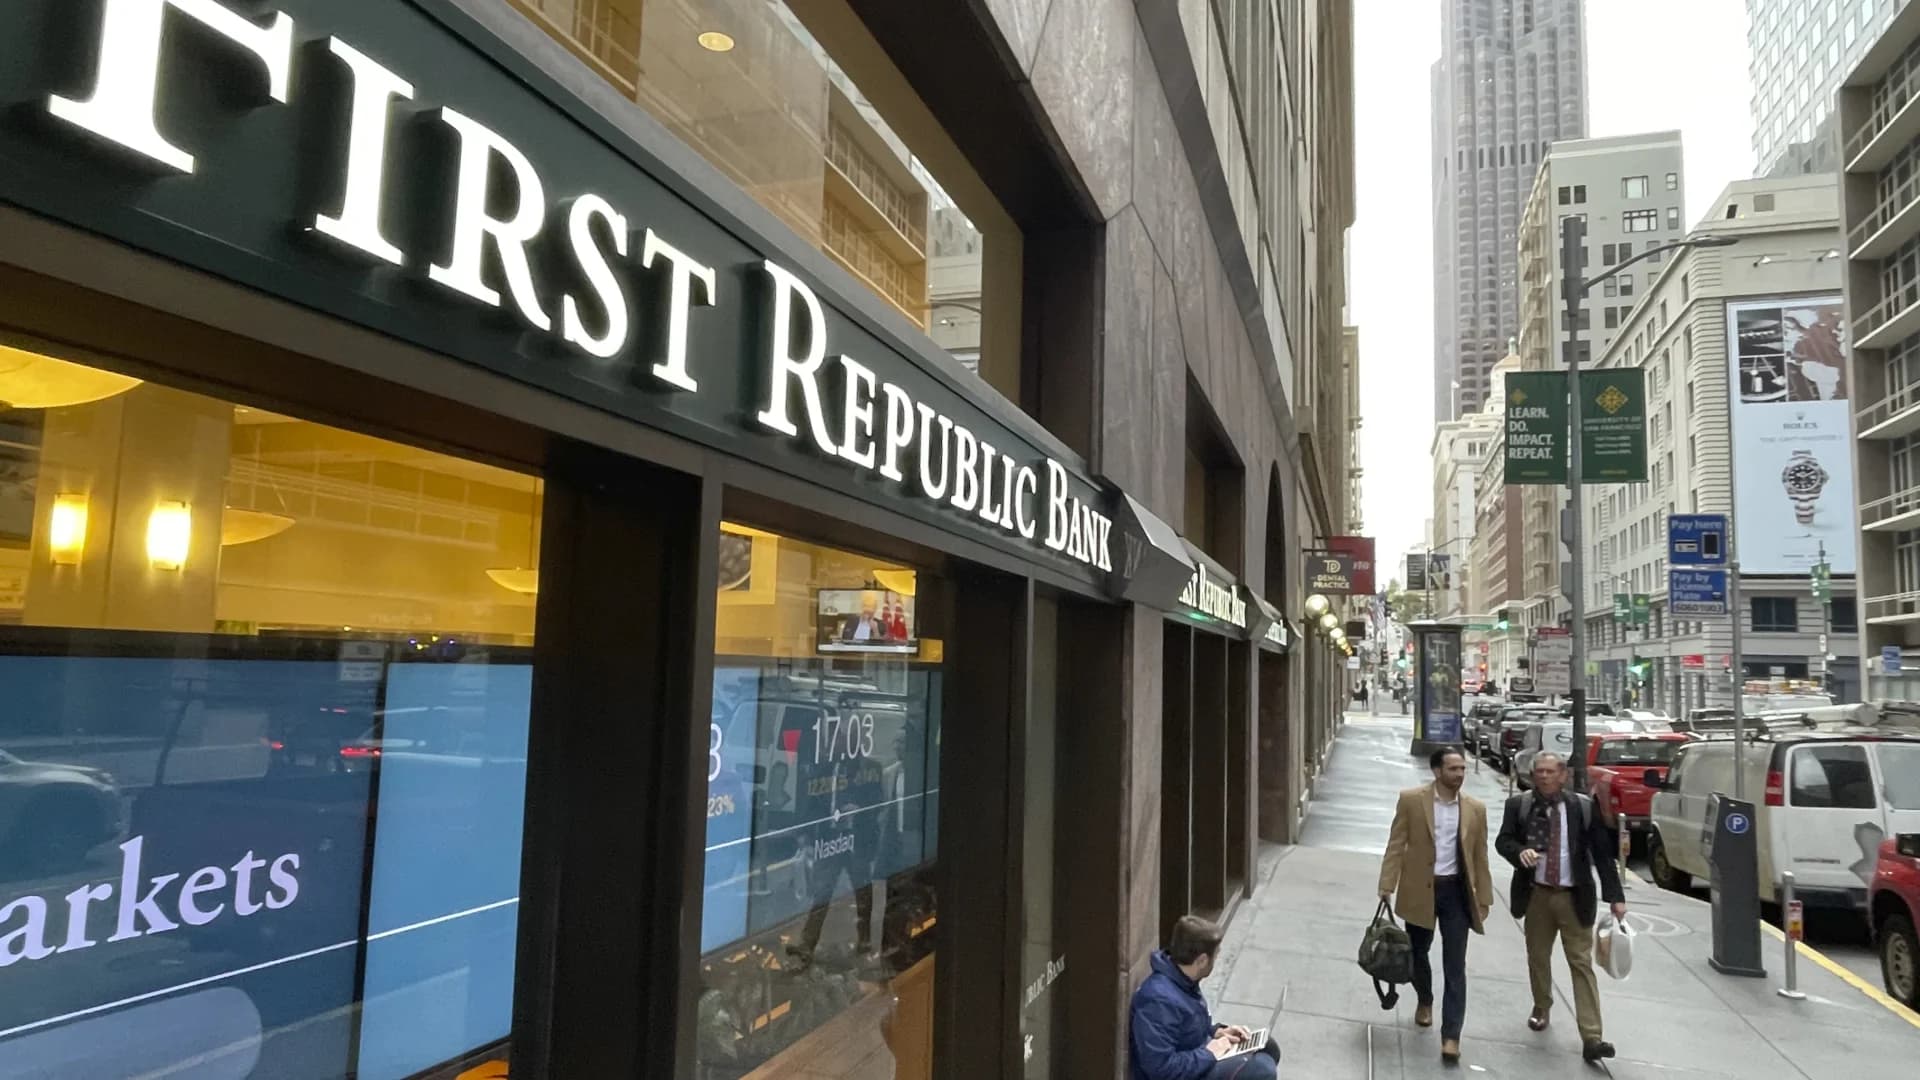 Why First Republic failed. Are other banks to follow?